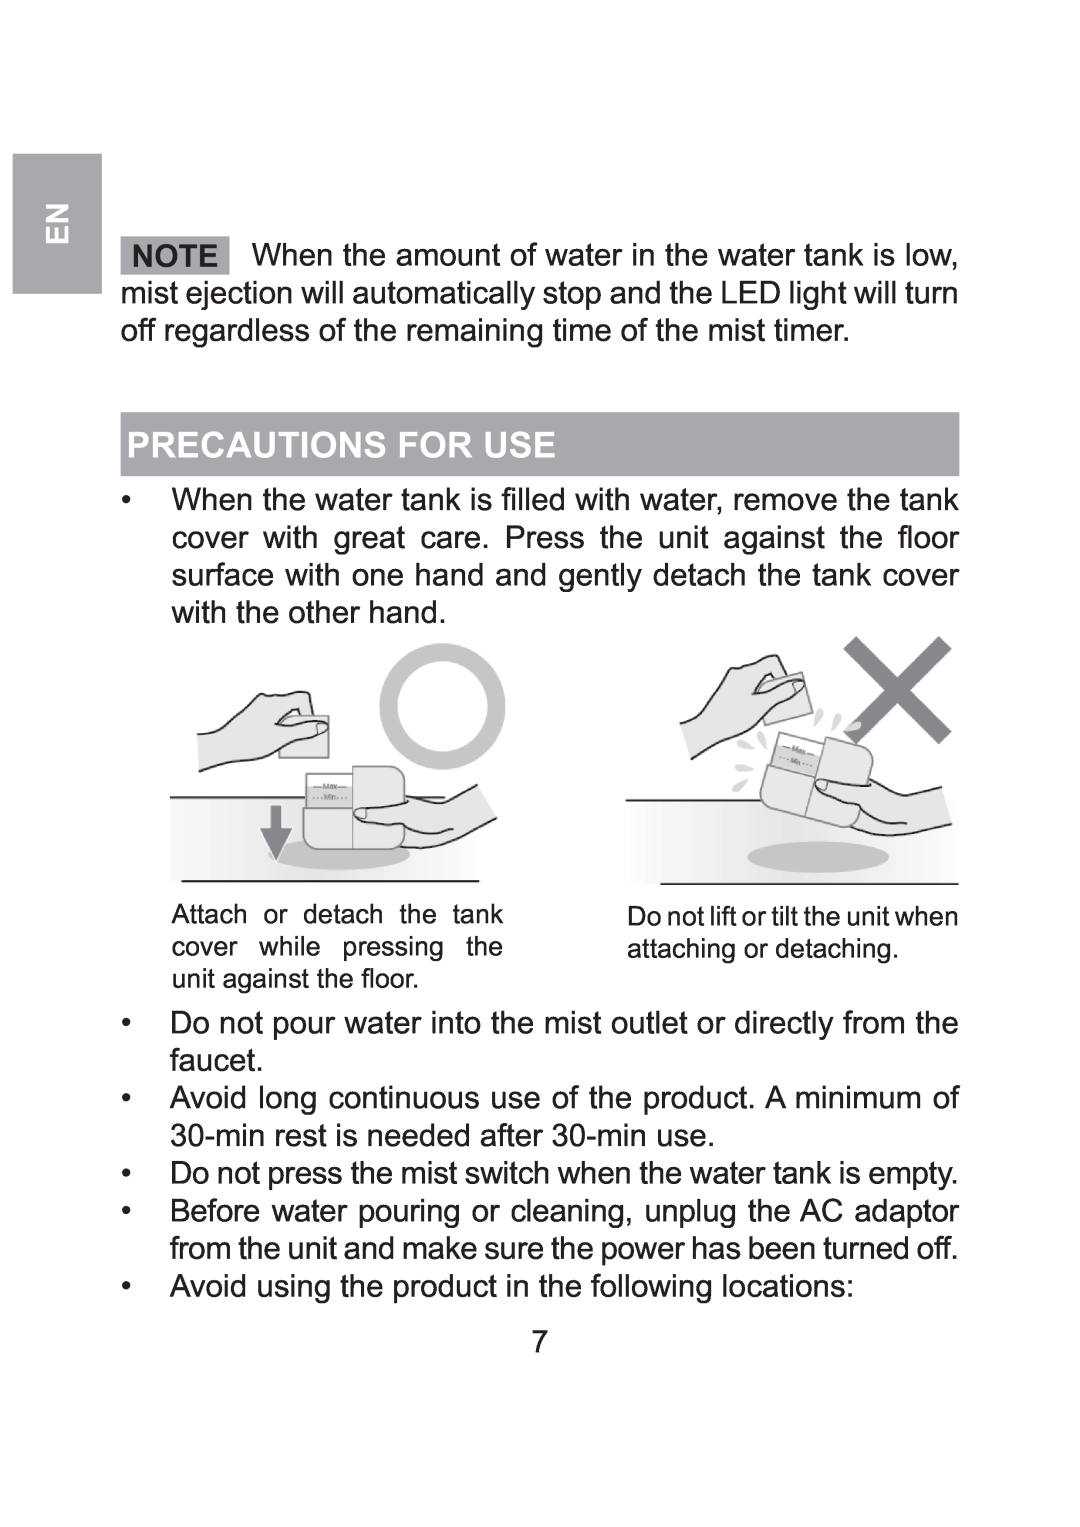 Oregon Scientific WS904 user manual Precautions For Use, When the amount of water in the water tank is low 